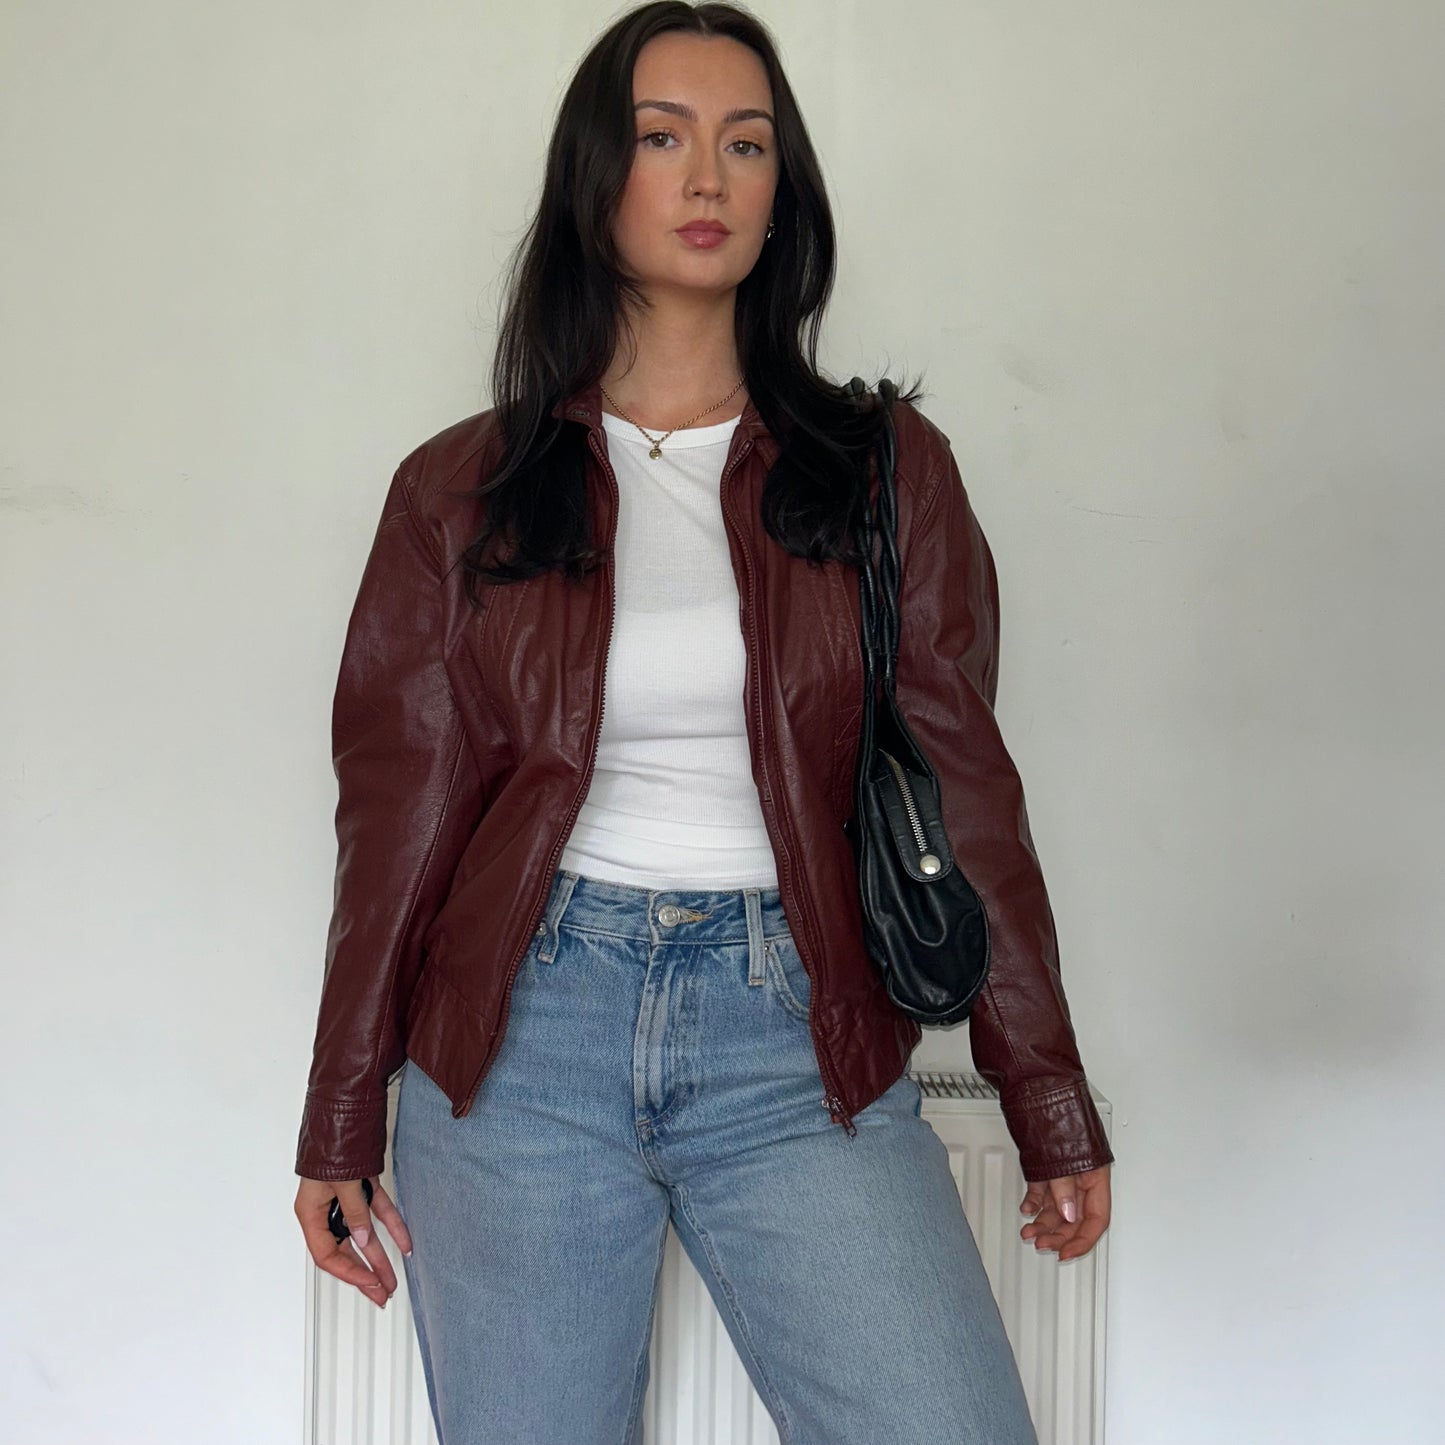 burgundy vintage leather jacket shown on a model wearing a white top and blue jeans